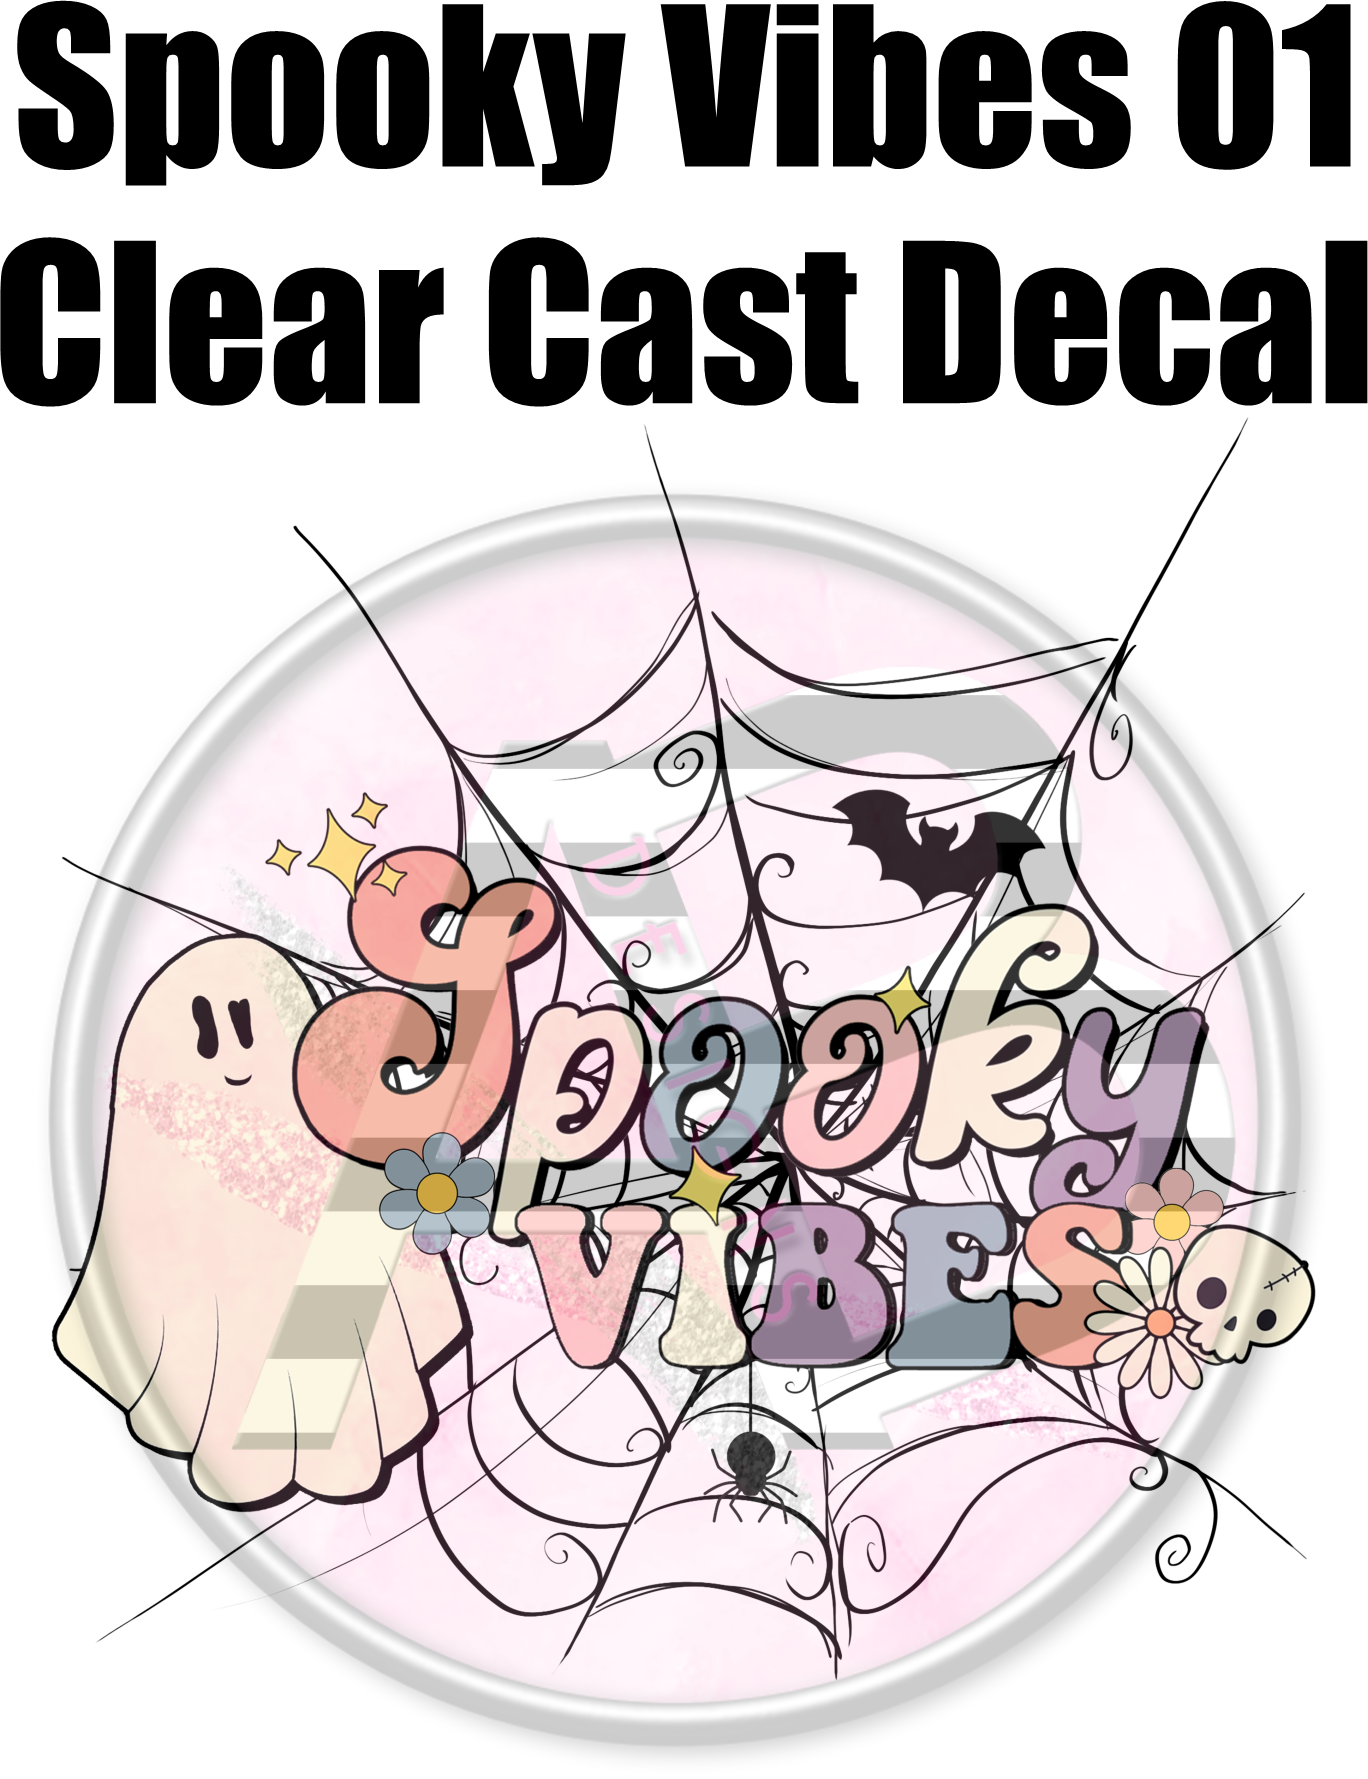 Spooky Vibes 01 - Clear Cast Decal